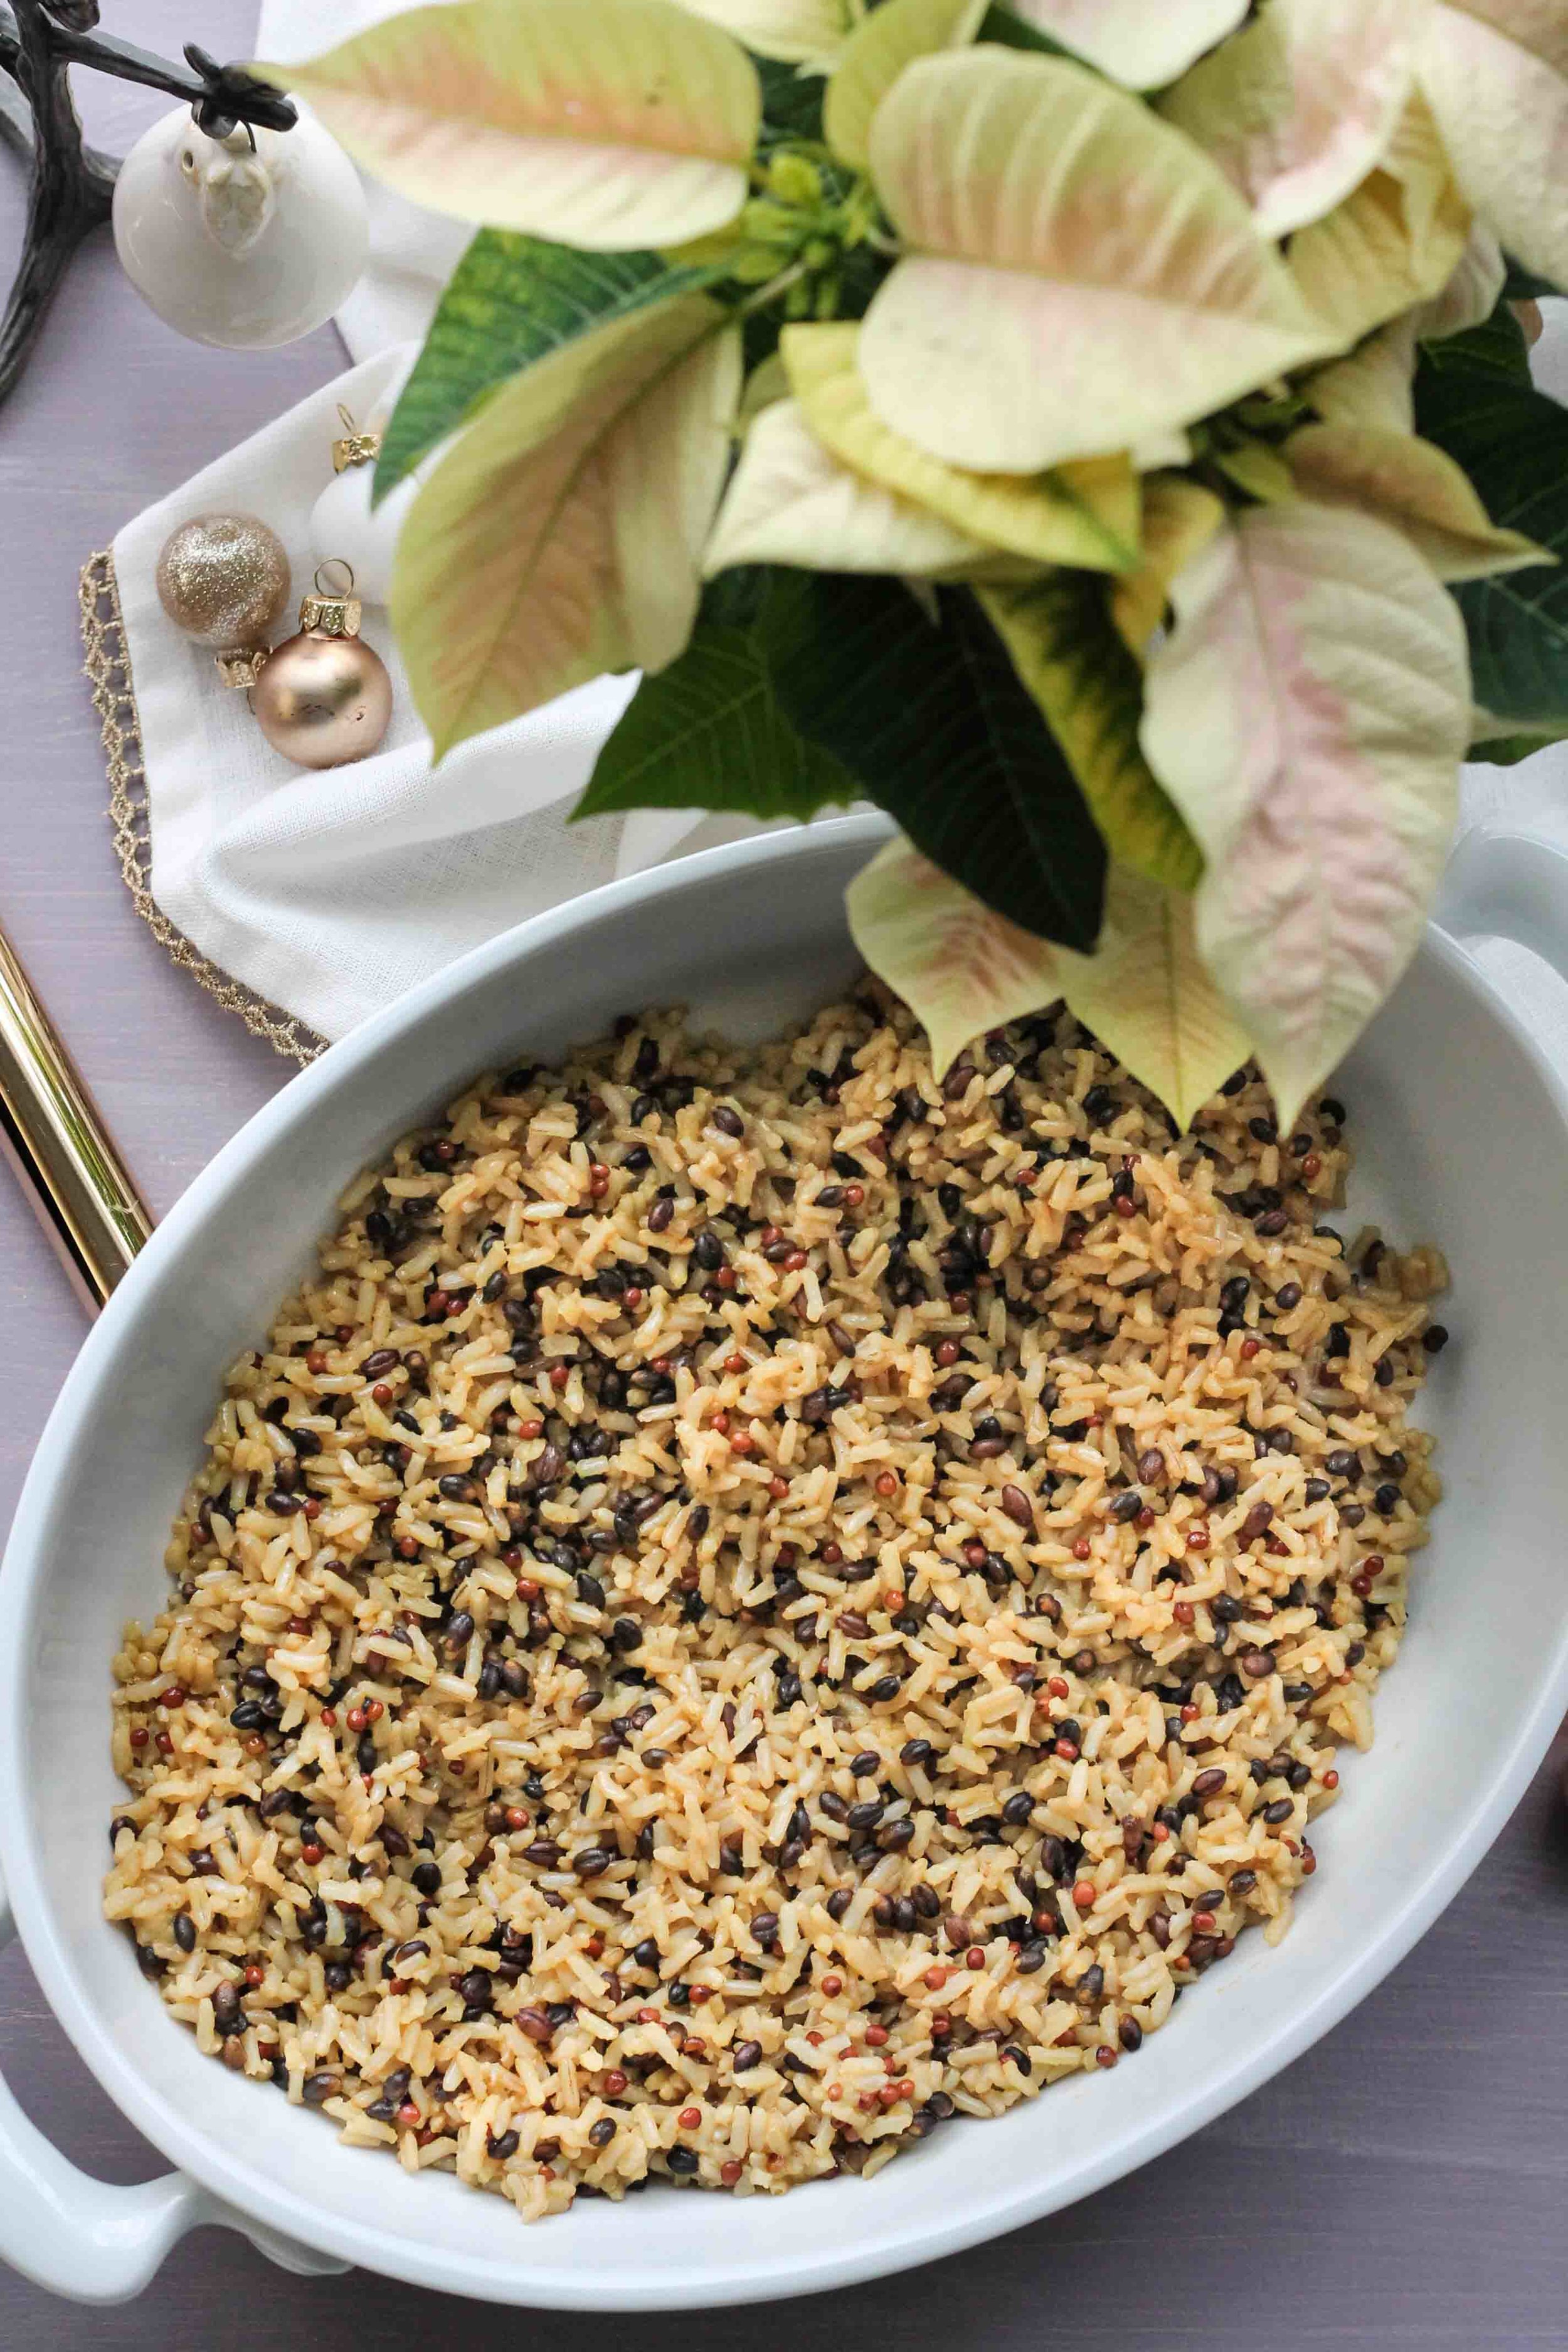 Ordinary wild rice becomes a fantastic, holiday stuffing when paired with plumped, dried cherries, spinach, truffle oil, and lots of parmesan. [pedanticfoodie.com]